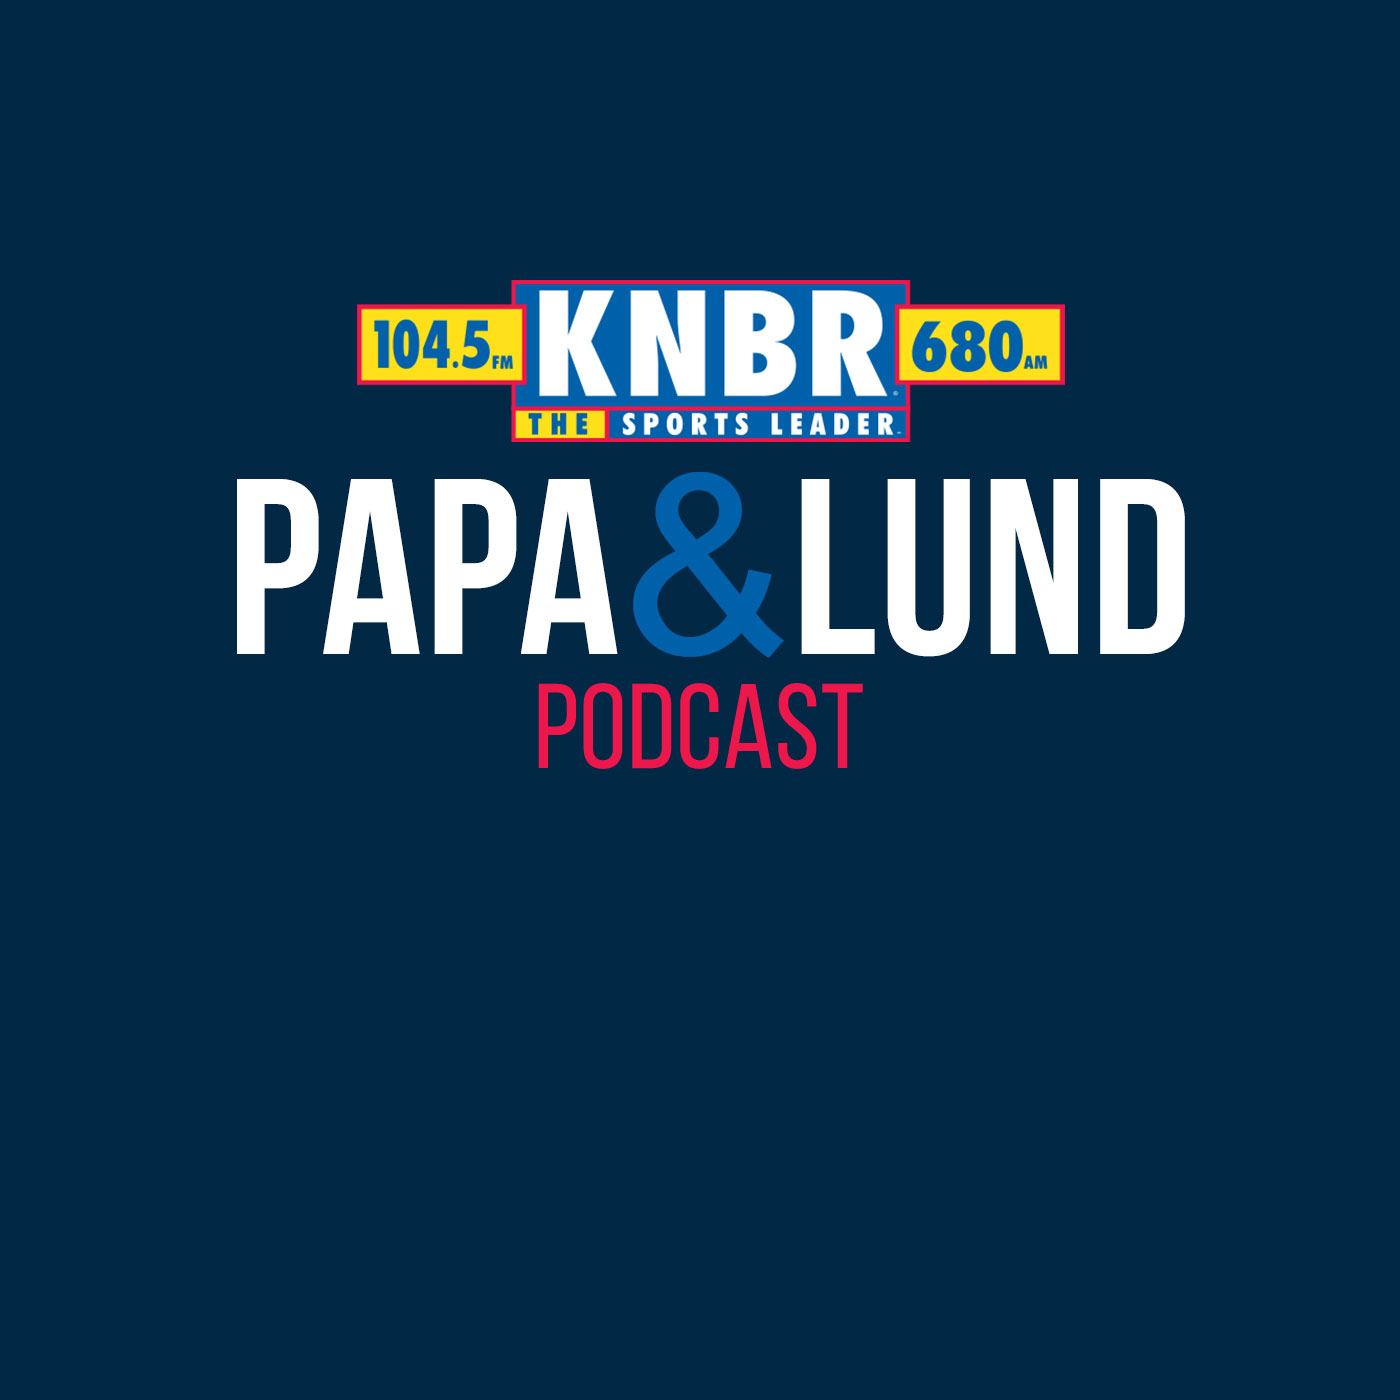 5-23 Marc Spears joins Papa & Lund to discuss what it means for Denver that the Nuggets have made their first NBA finals in NBA history as well as LeBron's comments on his future in the game and if there is a real chance that he will retire this offseason